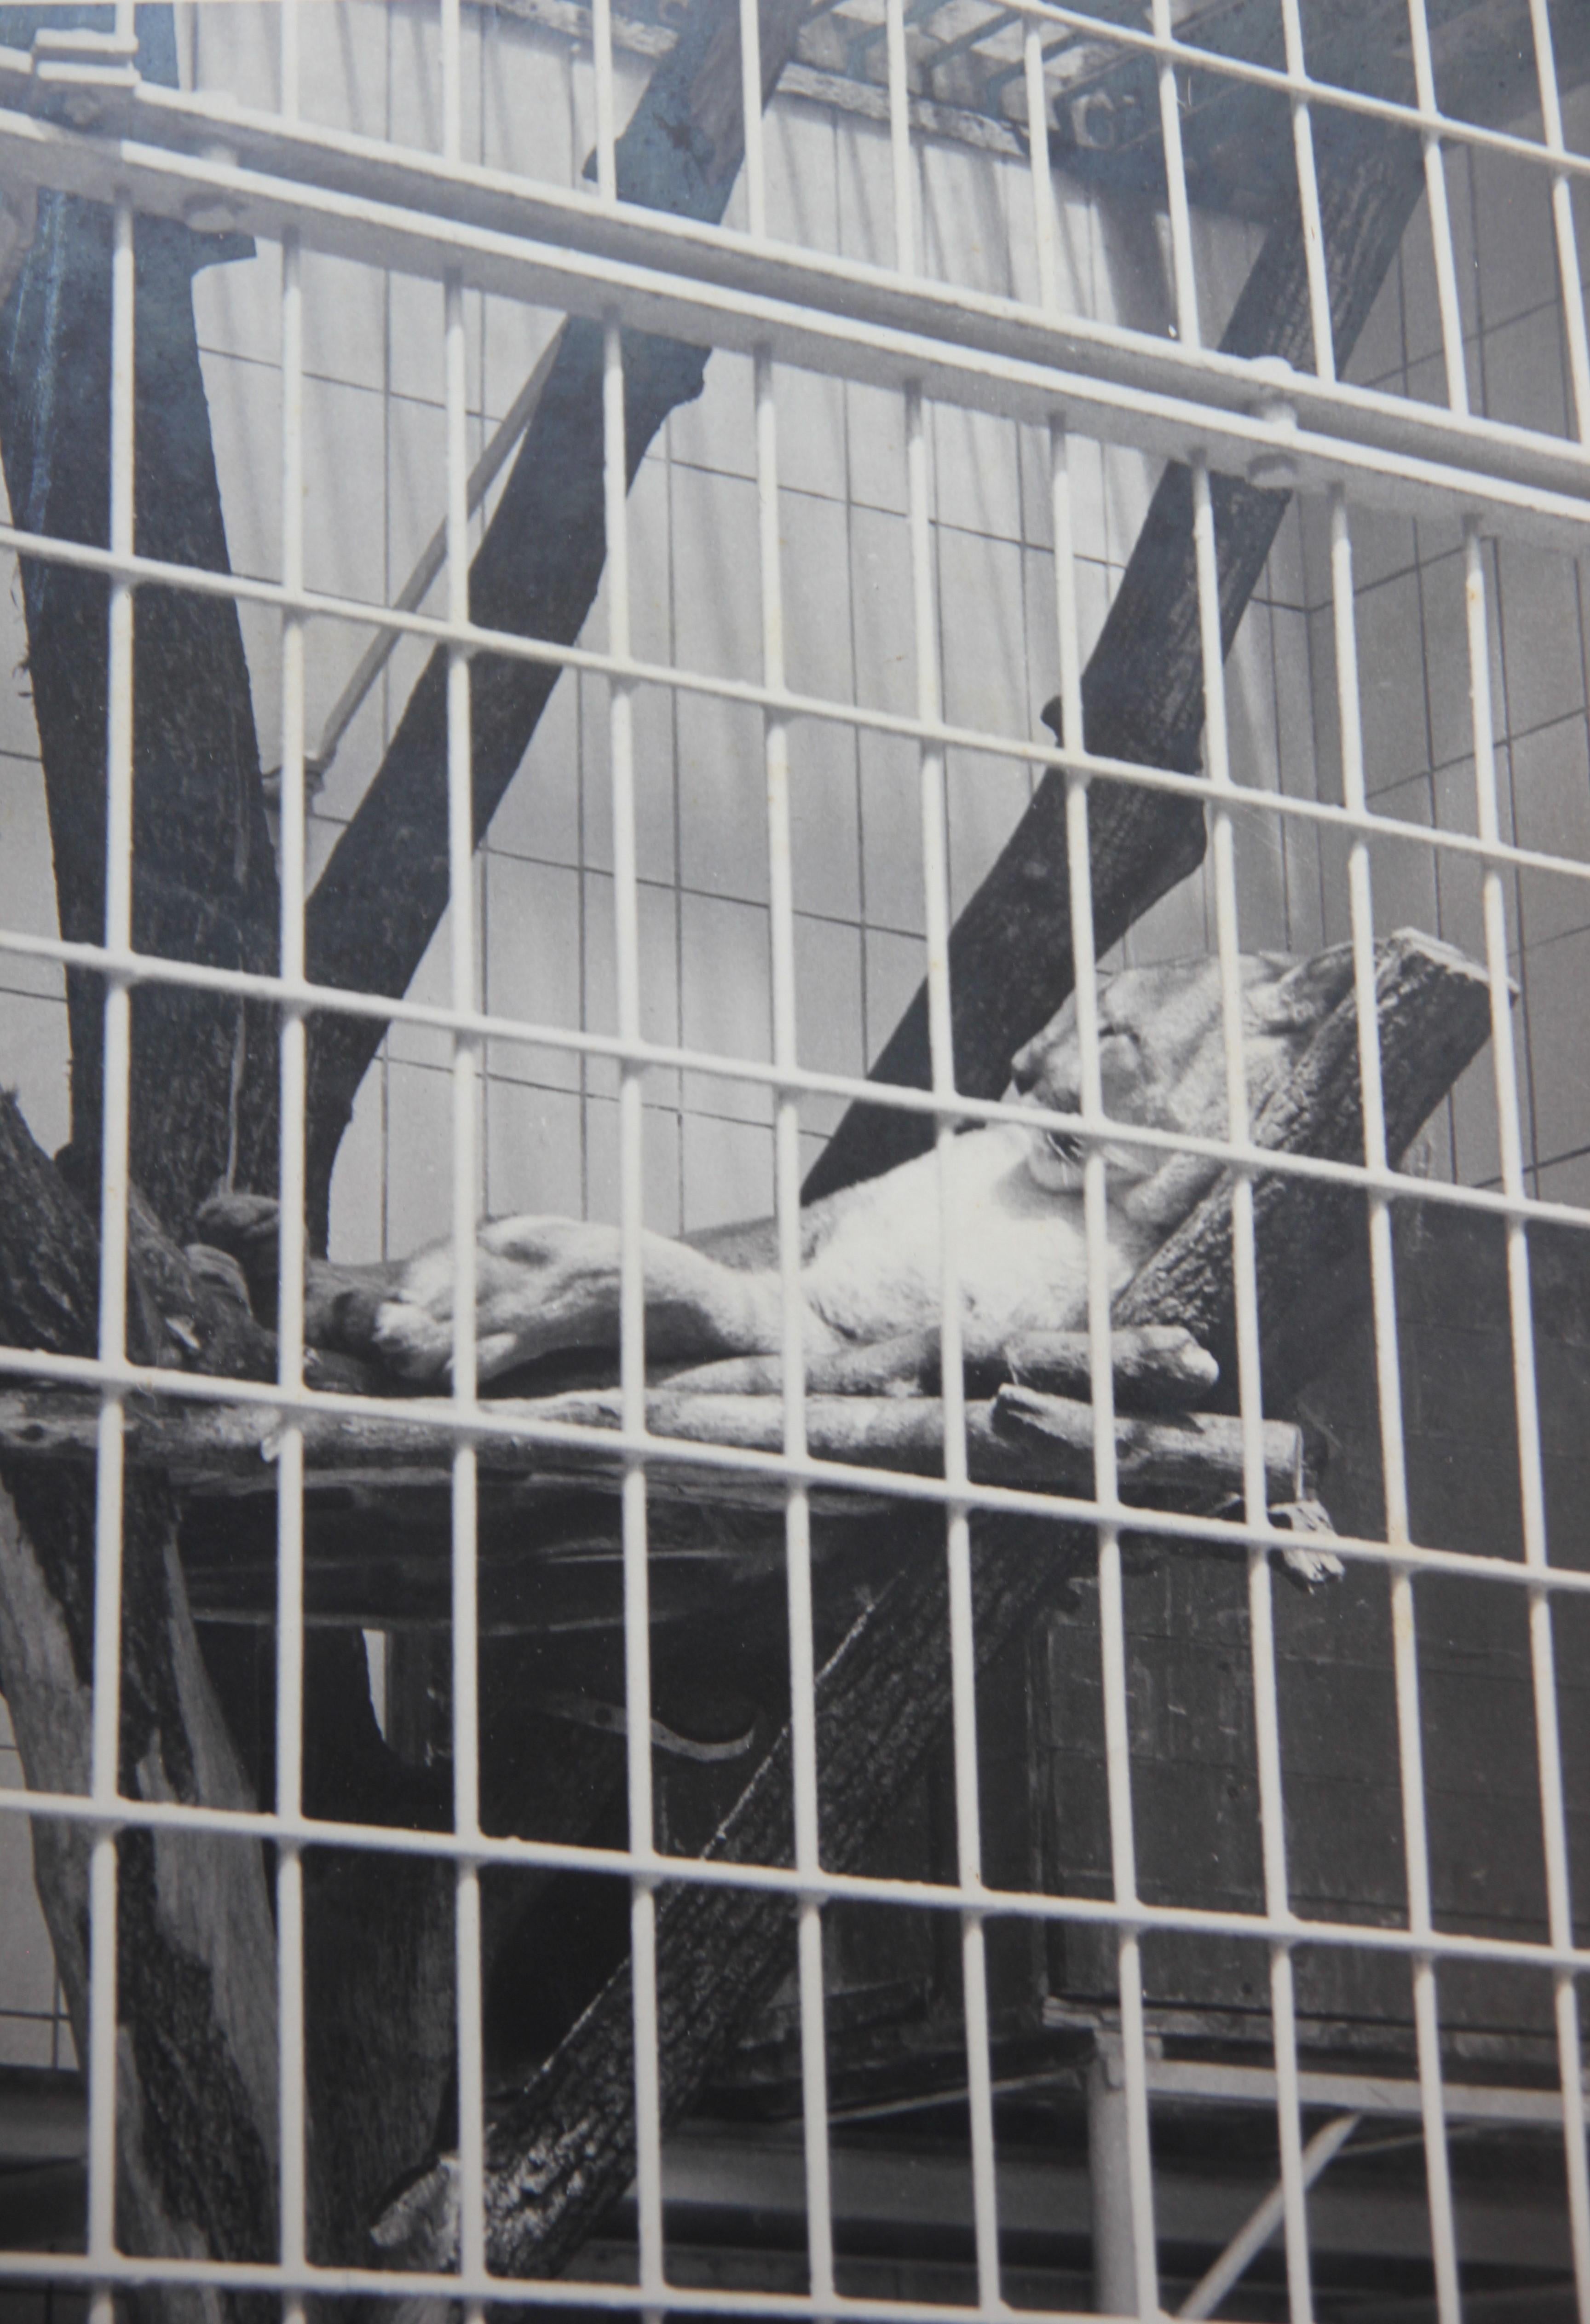 Early Black and White Photograph of a Large Cat Lounging in a Zoo Enclosure - Gray Figurative Photograph by Unknown